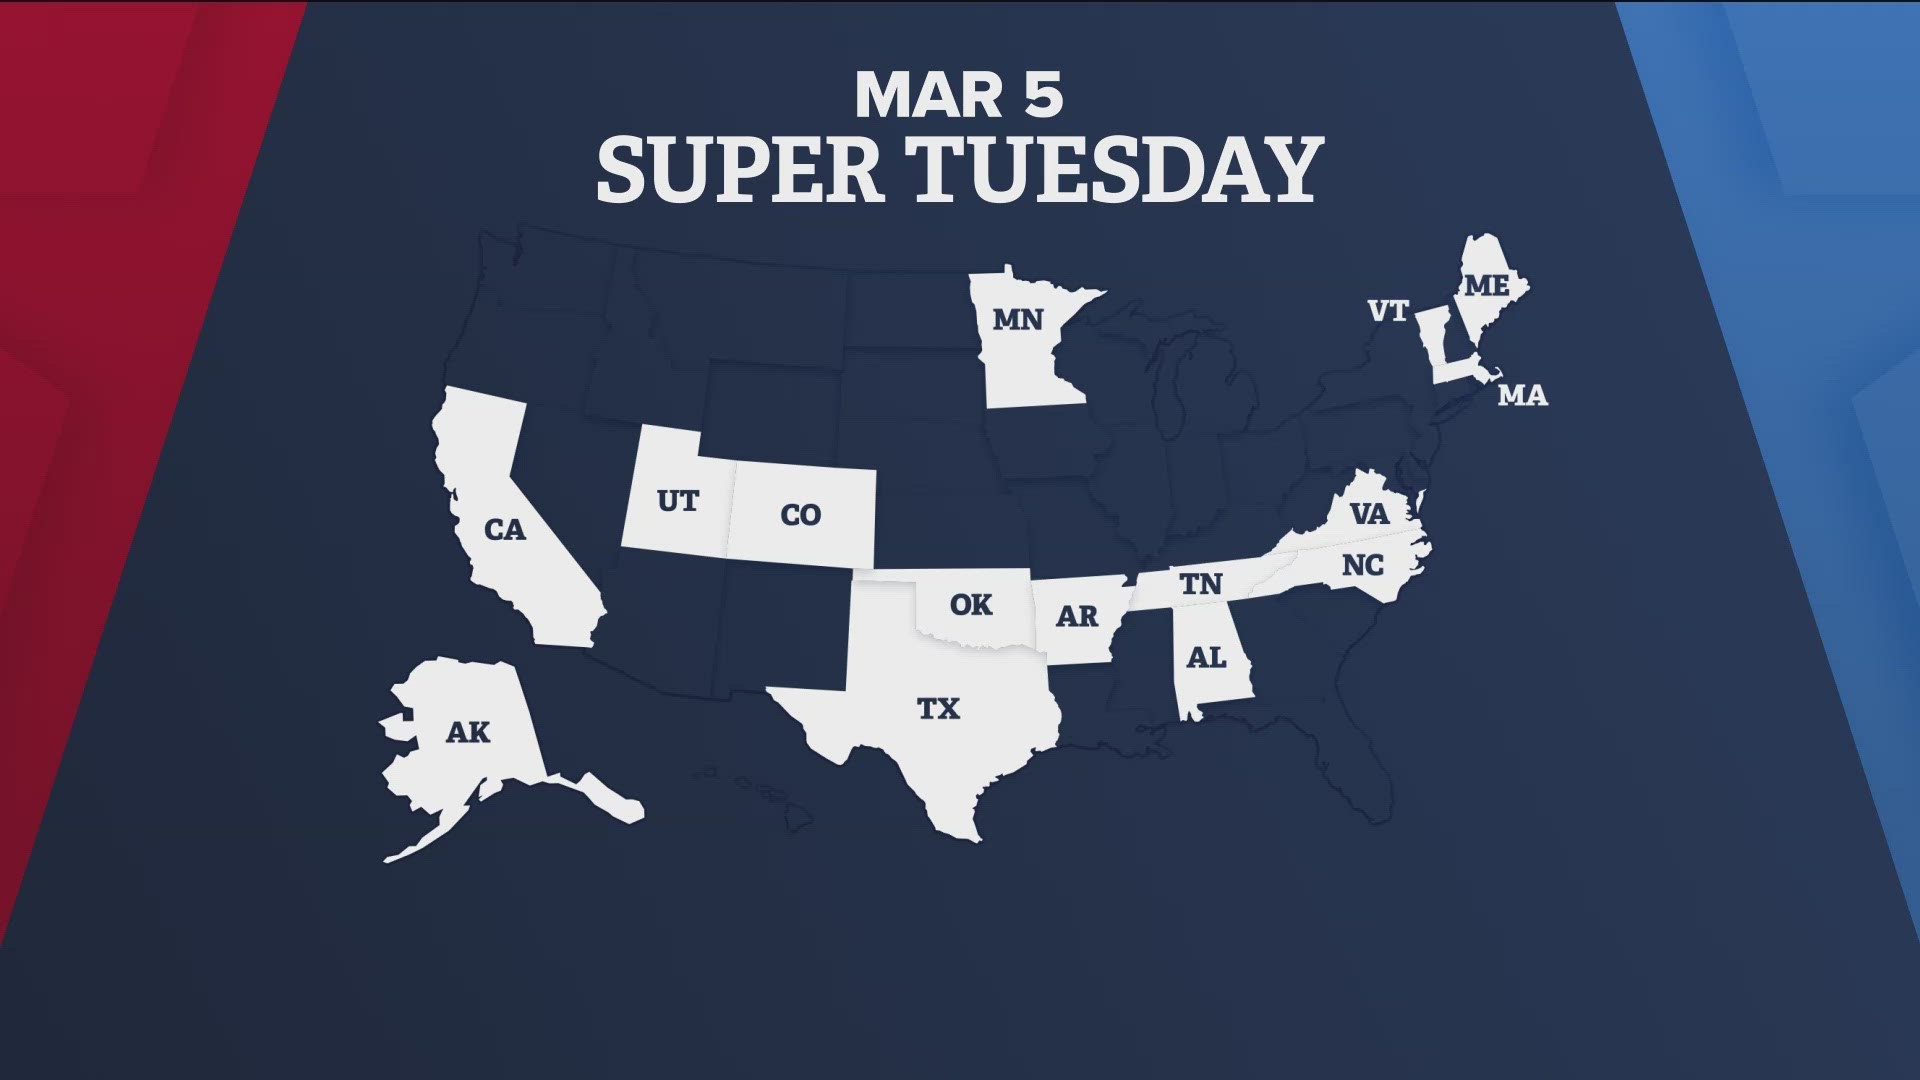 Minnesota will be one of 16 states that will be part of the Super Tuesday presidential nominating results.